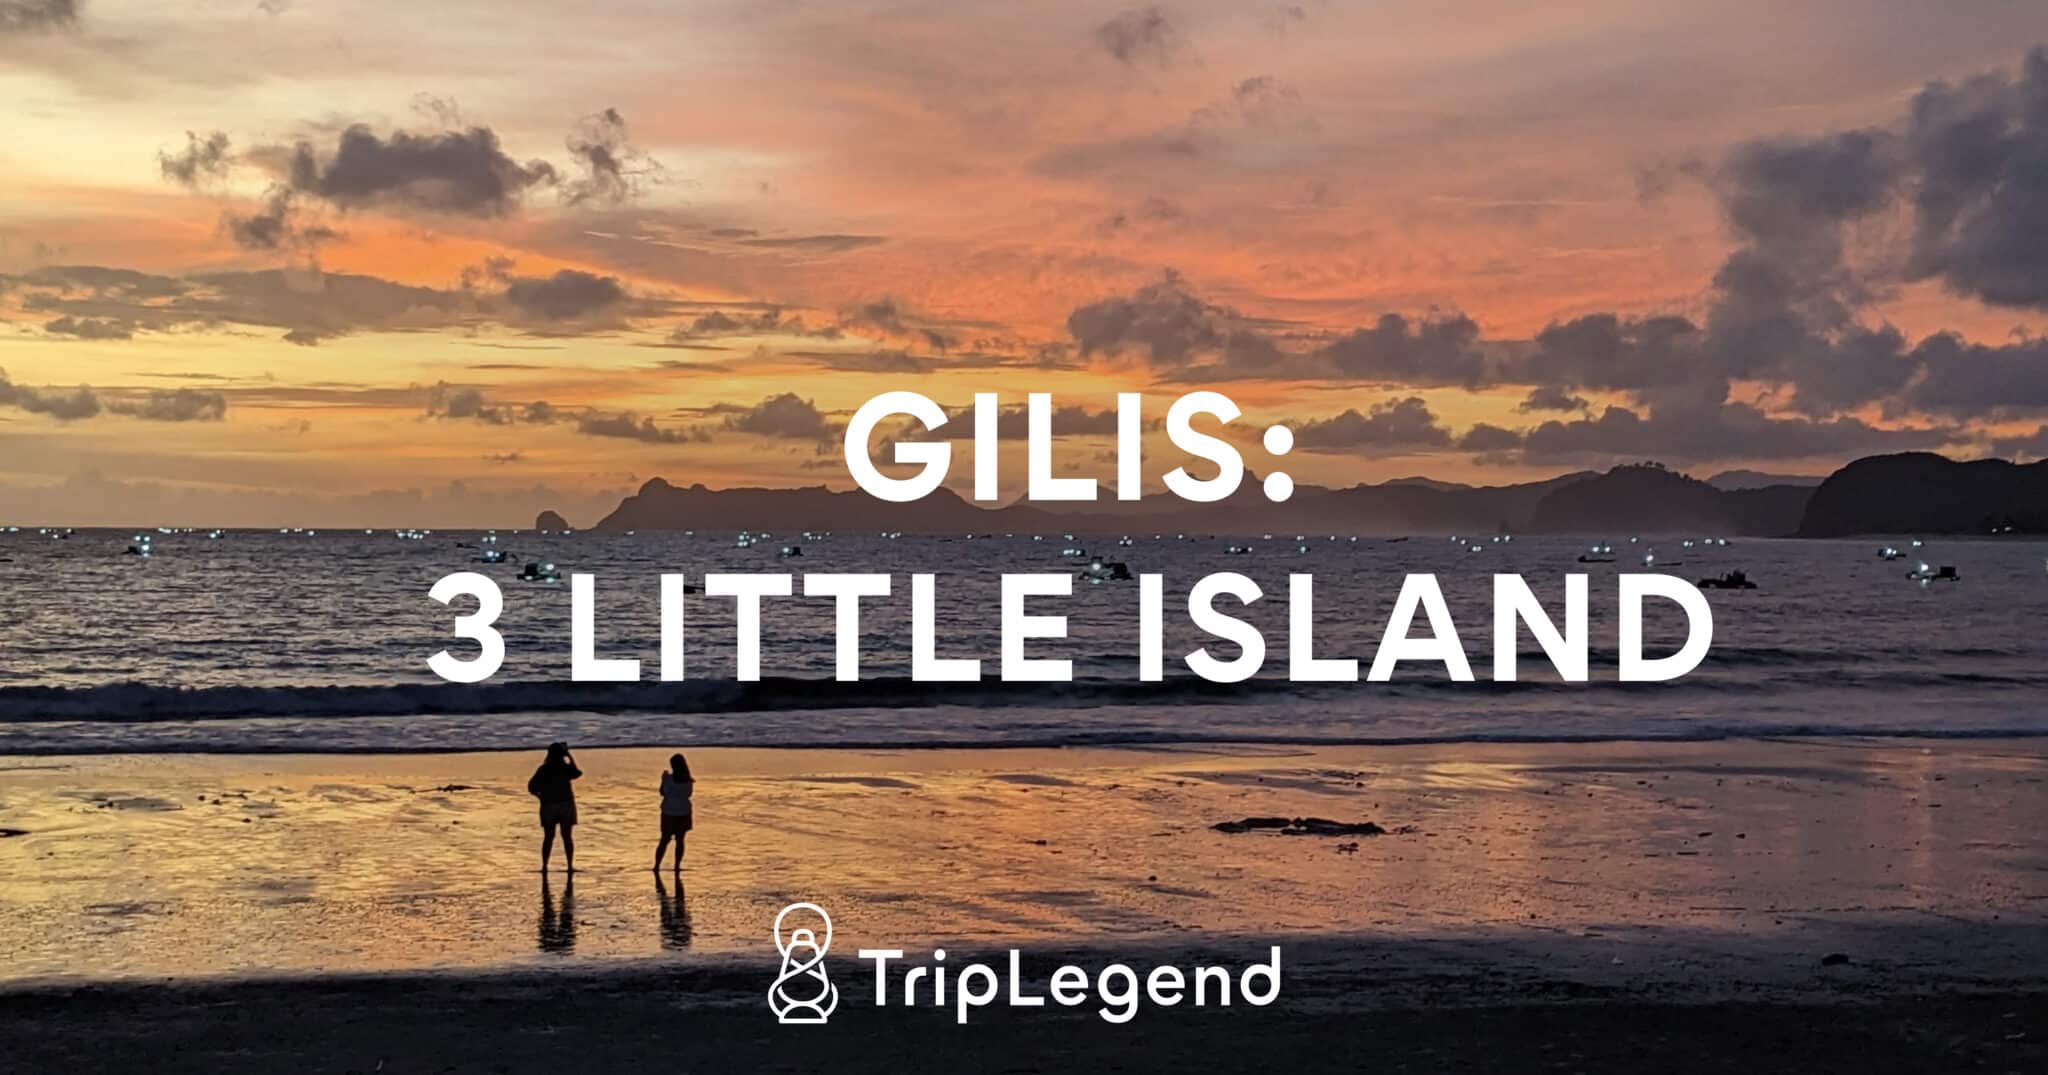 Gilis 3 Small Islands That Inspire Through Diversity 1 Scaled.jpg